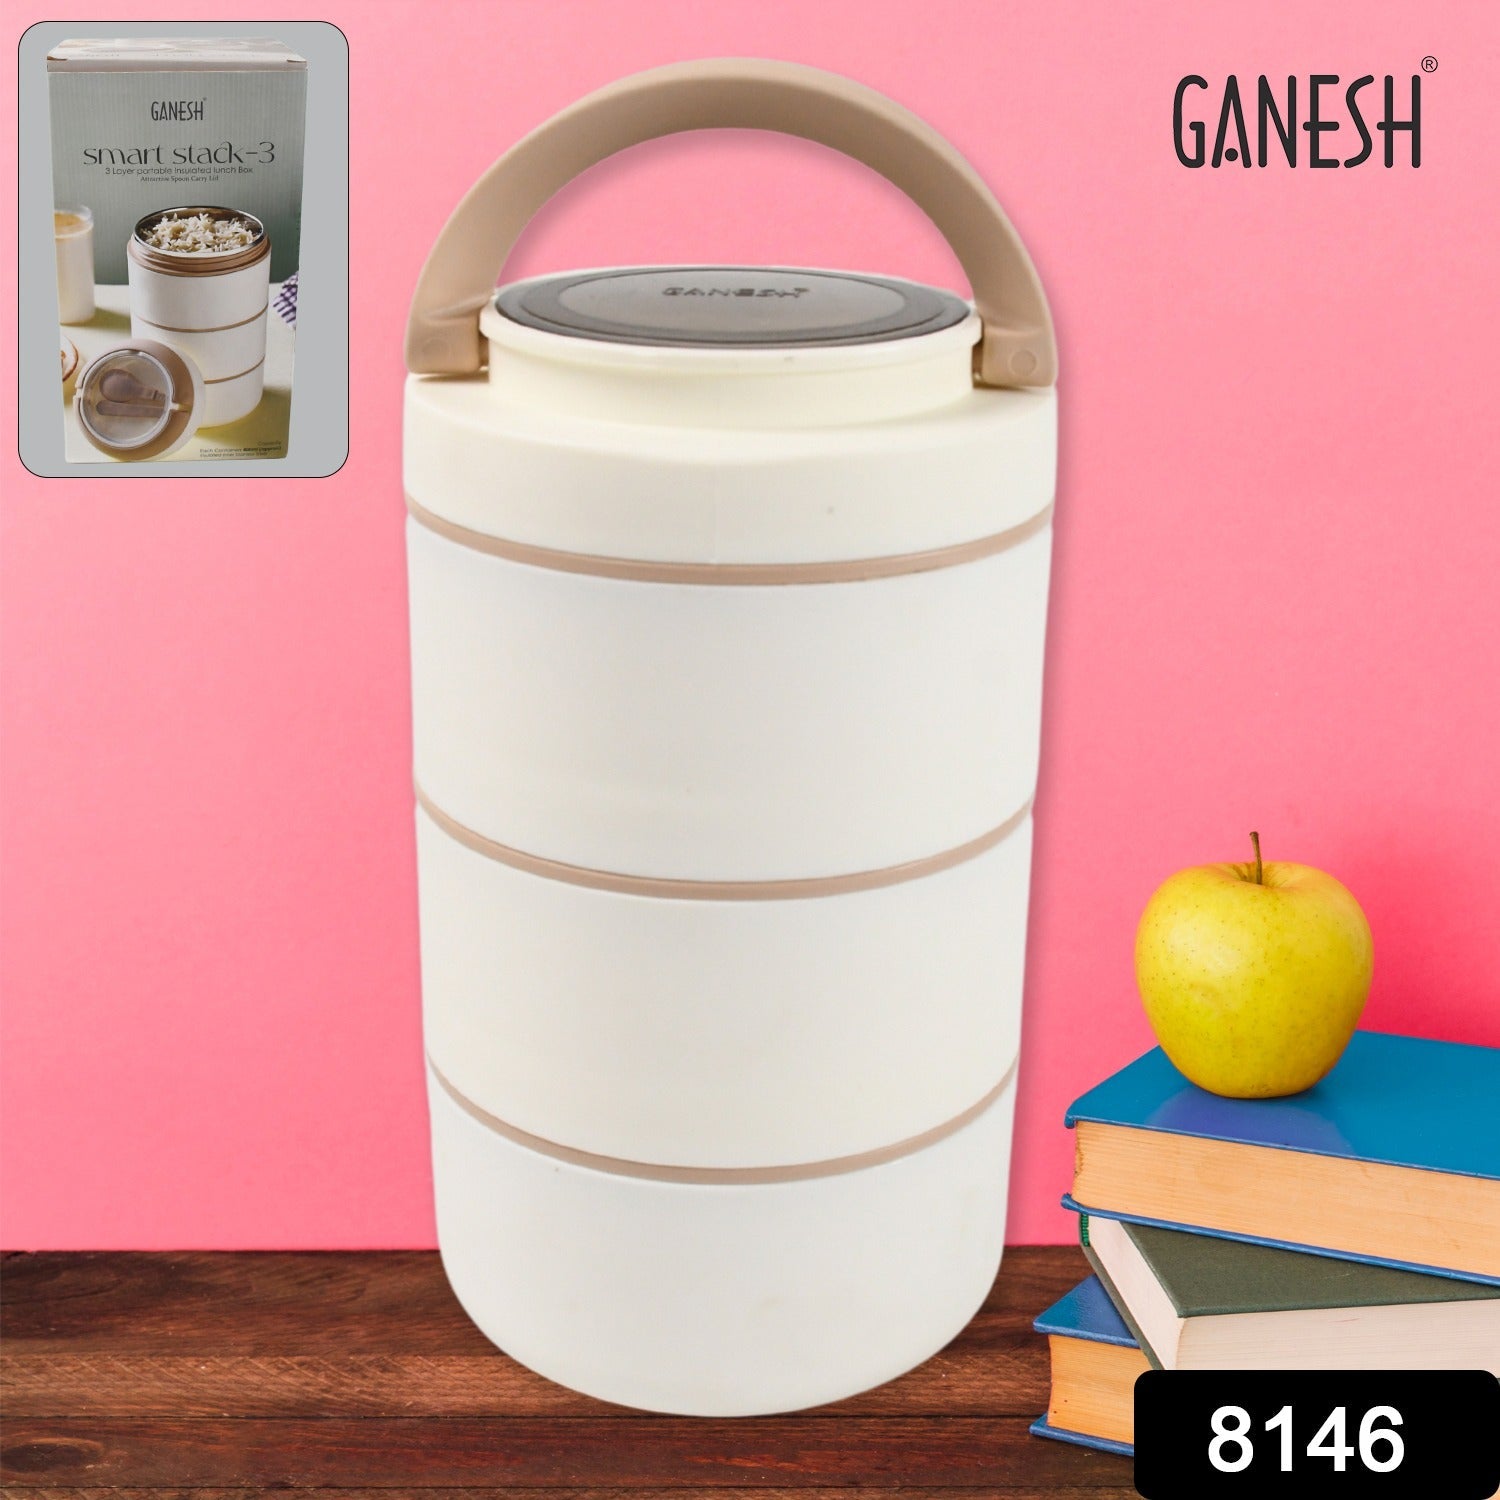 Ganesh Smart Stack 2/3 Layer Portable Lunch Box Stainless Steel Airtight Leak-Proof Lunch Box for Office, School, Picnic: Color May Vary (2 Layer / 3 Layer)